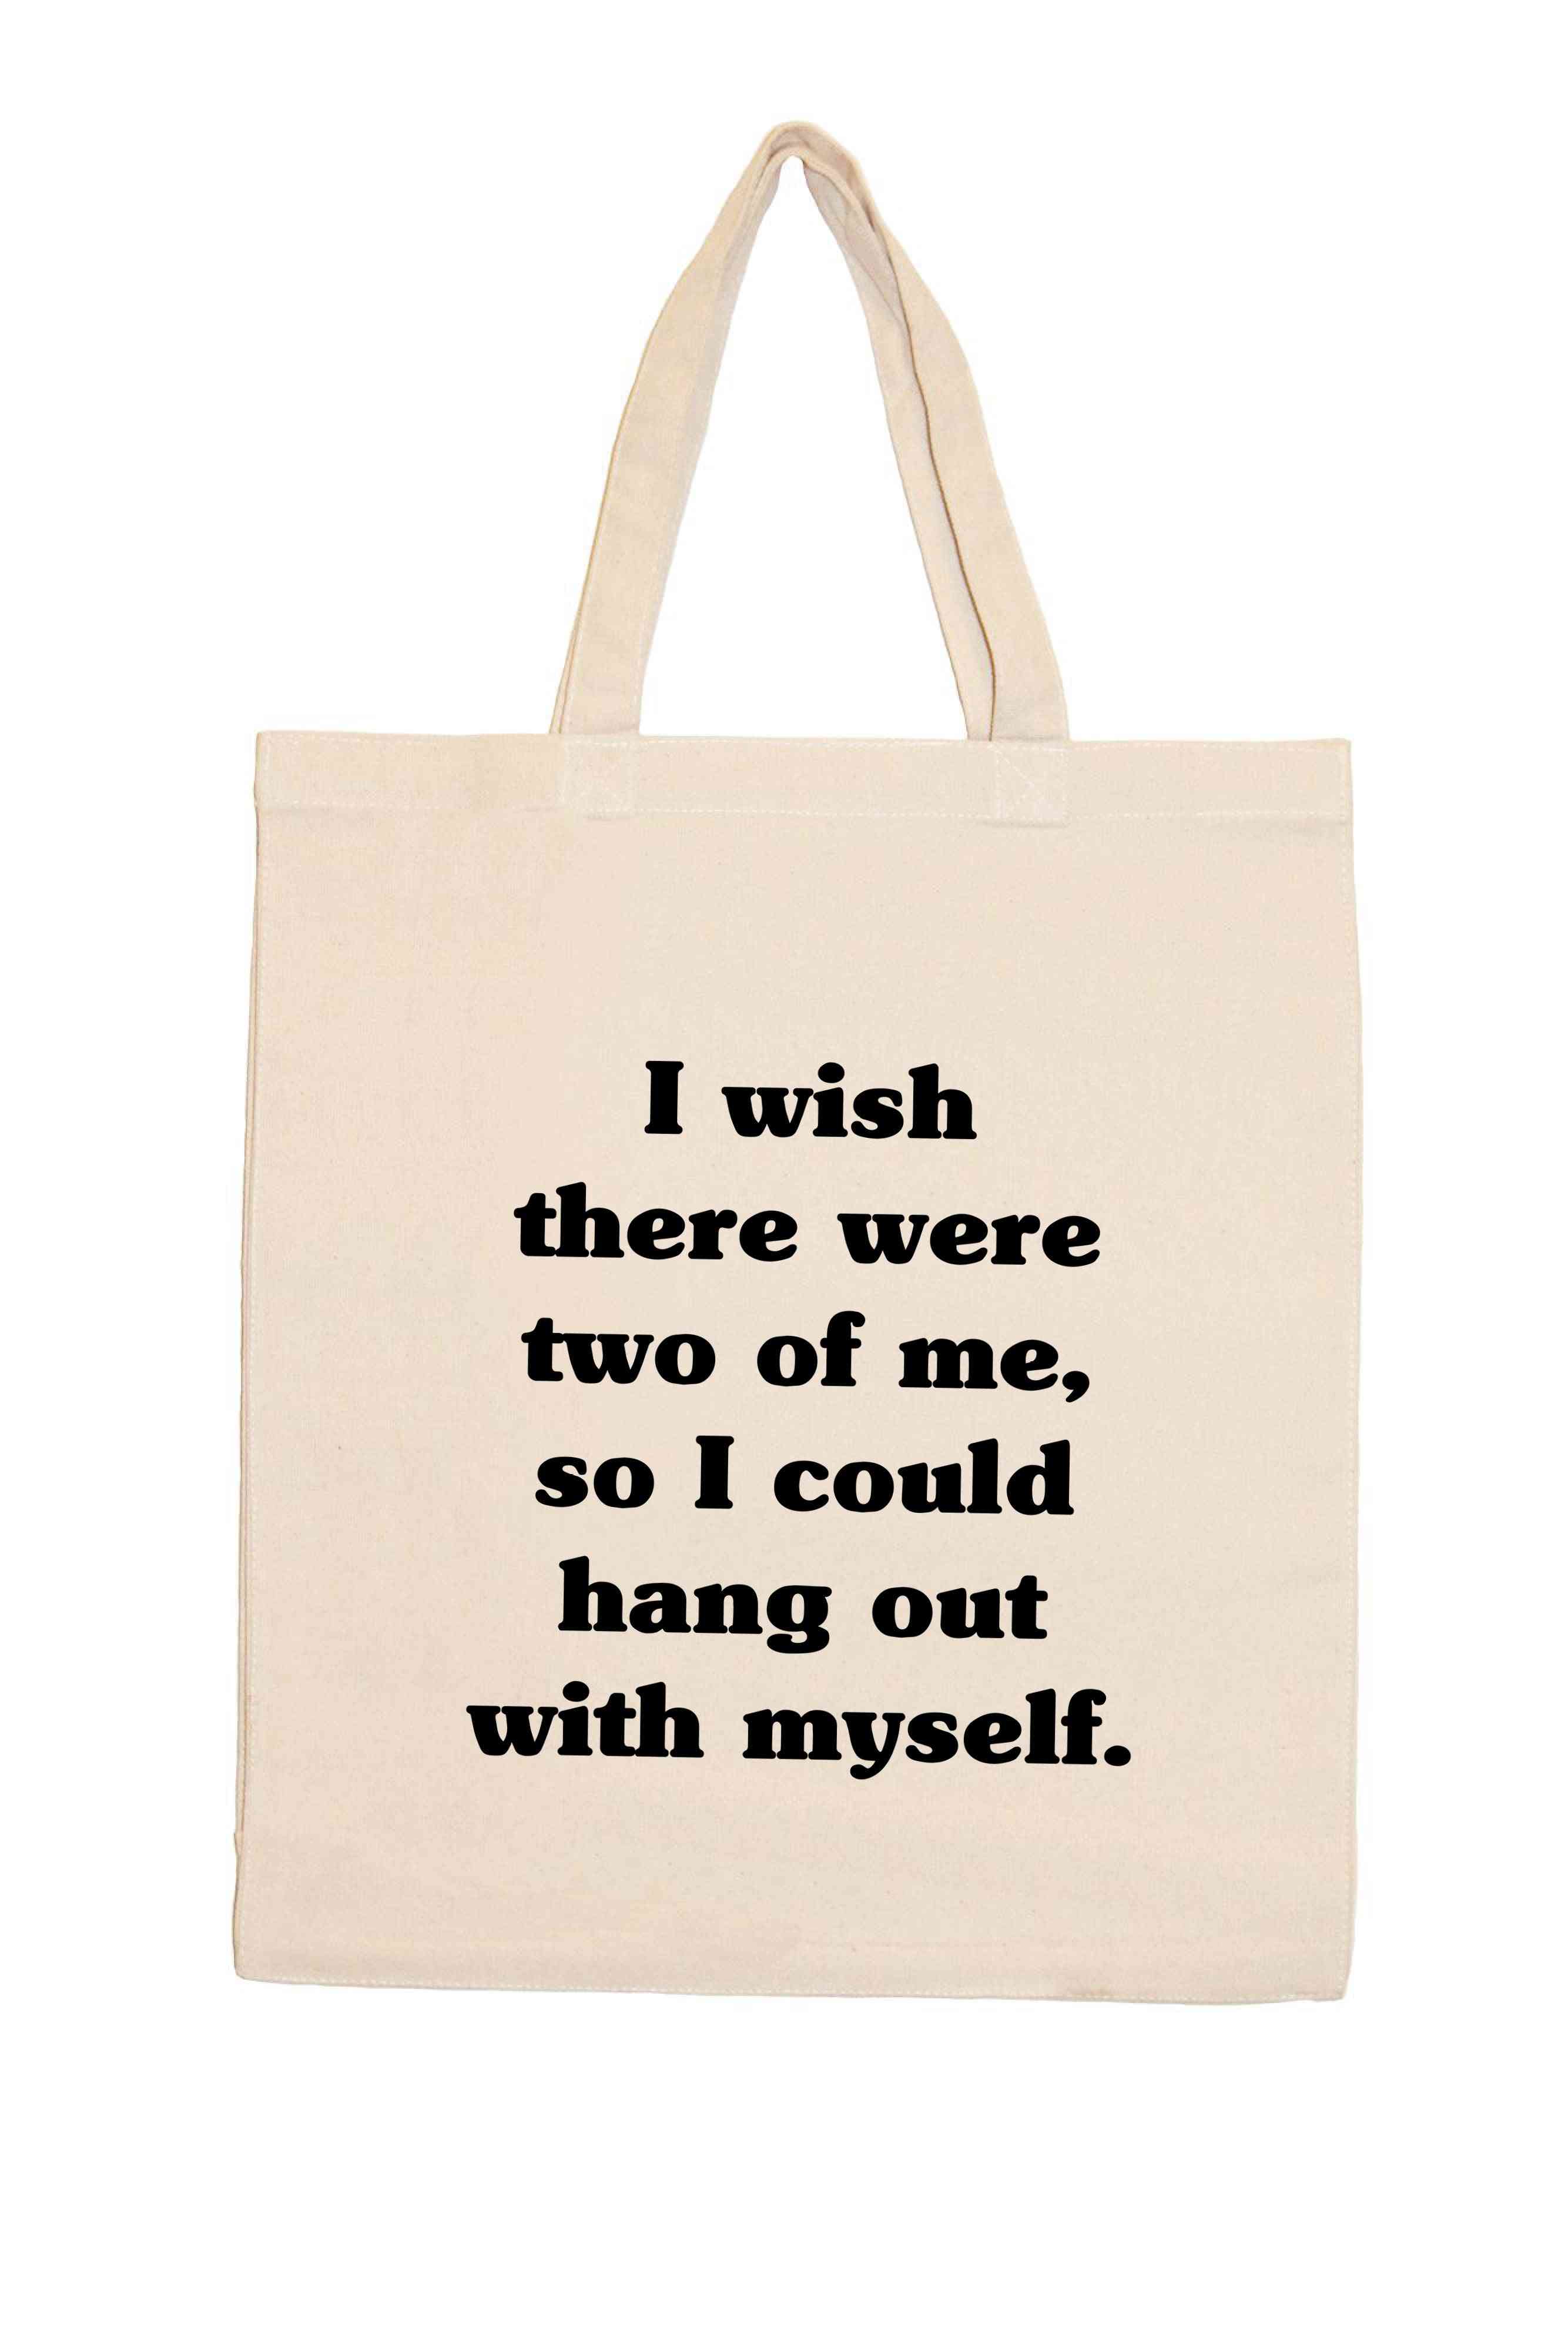 I Wish There Were Two Of Me, So I Could Hang Out With Myself. Shopping Totes